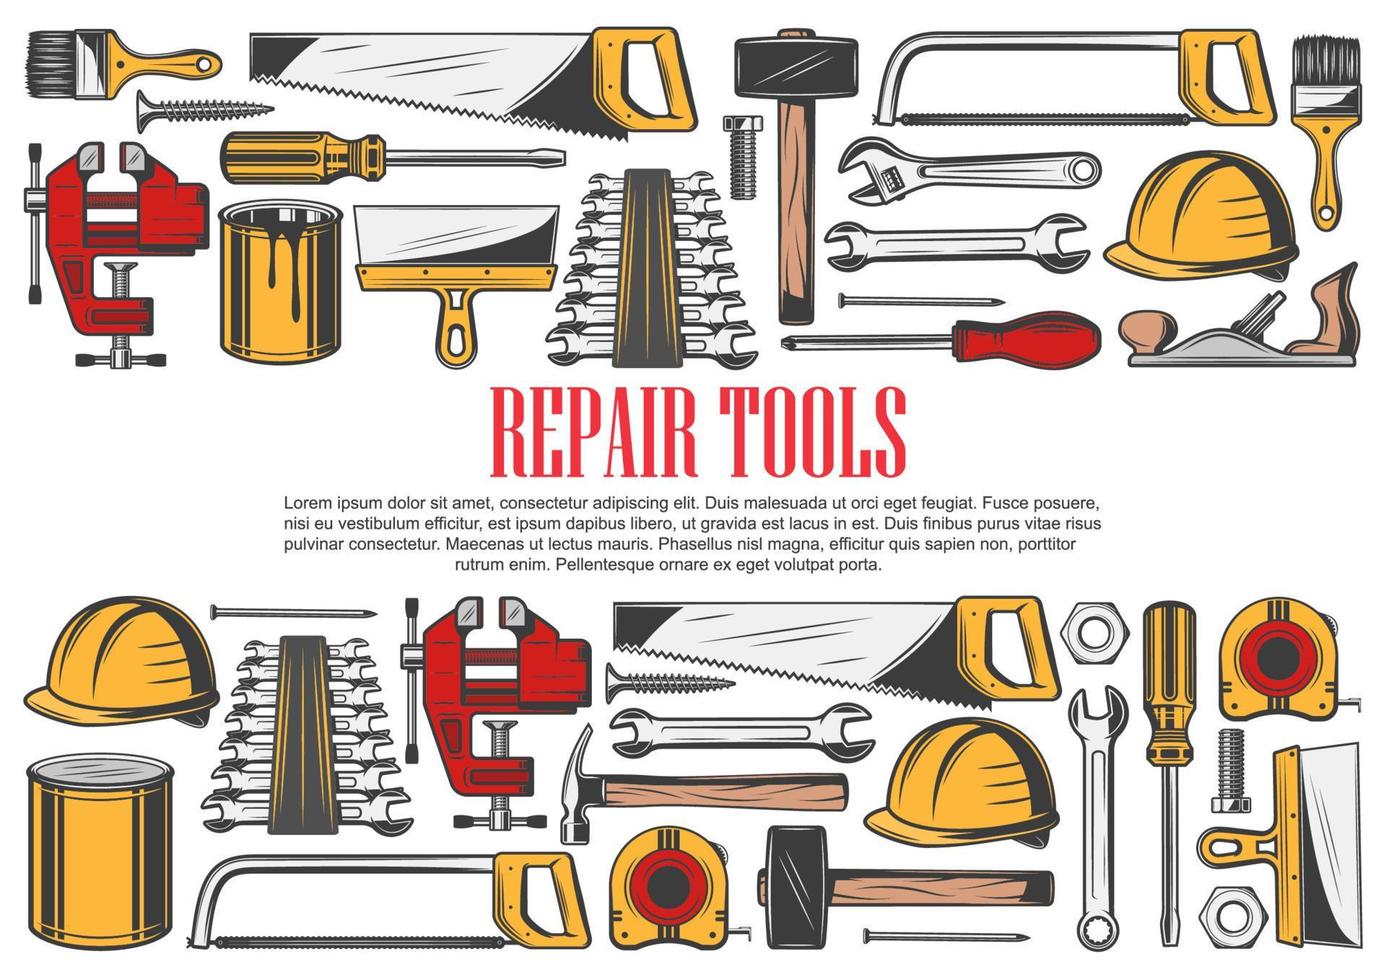 House repair tools and equipment vector